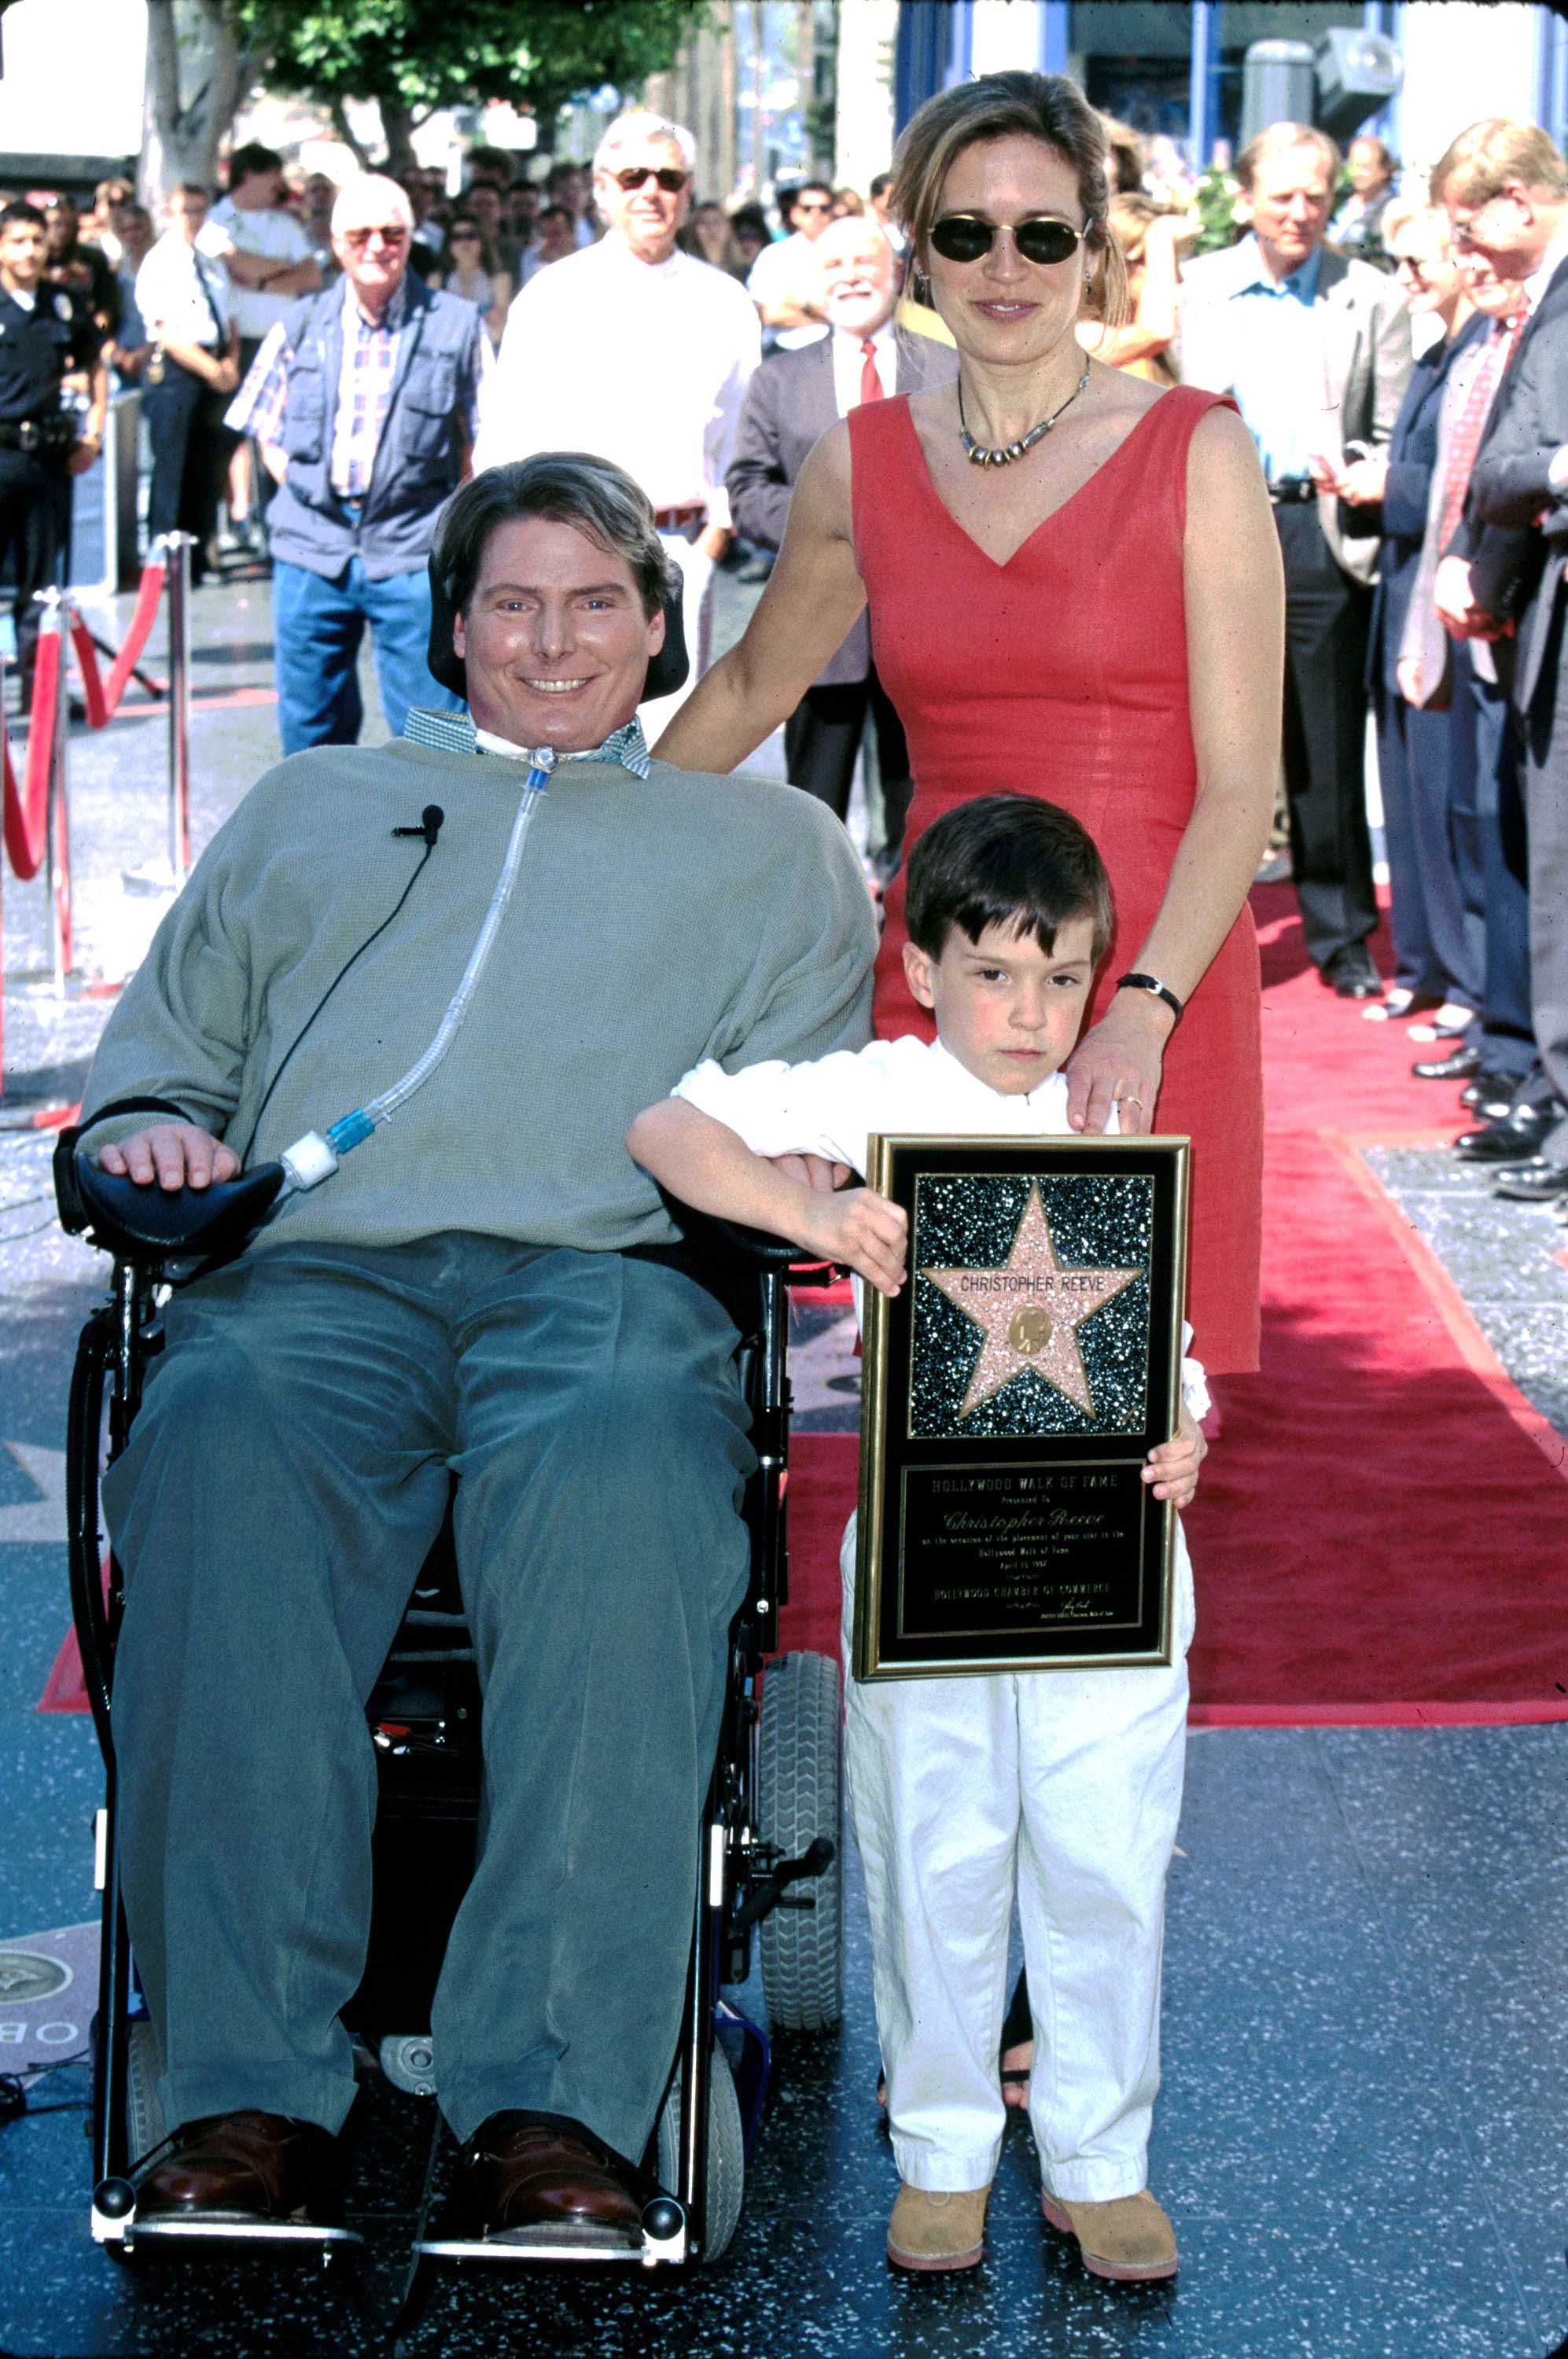 Christopher Reeve and Dana Reeve with their son Will during Christopher Reeve Honored with a Star on the Hollywood Walk of Fame at Hollywood Boulevard in Hollywood, California. / Source: Getty Images